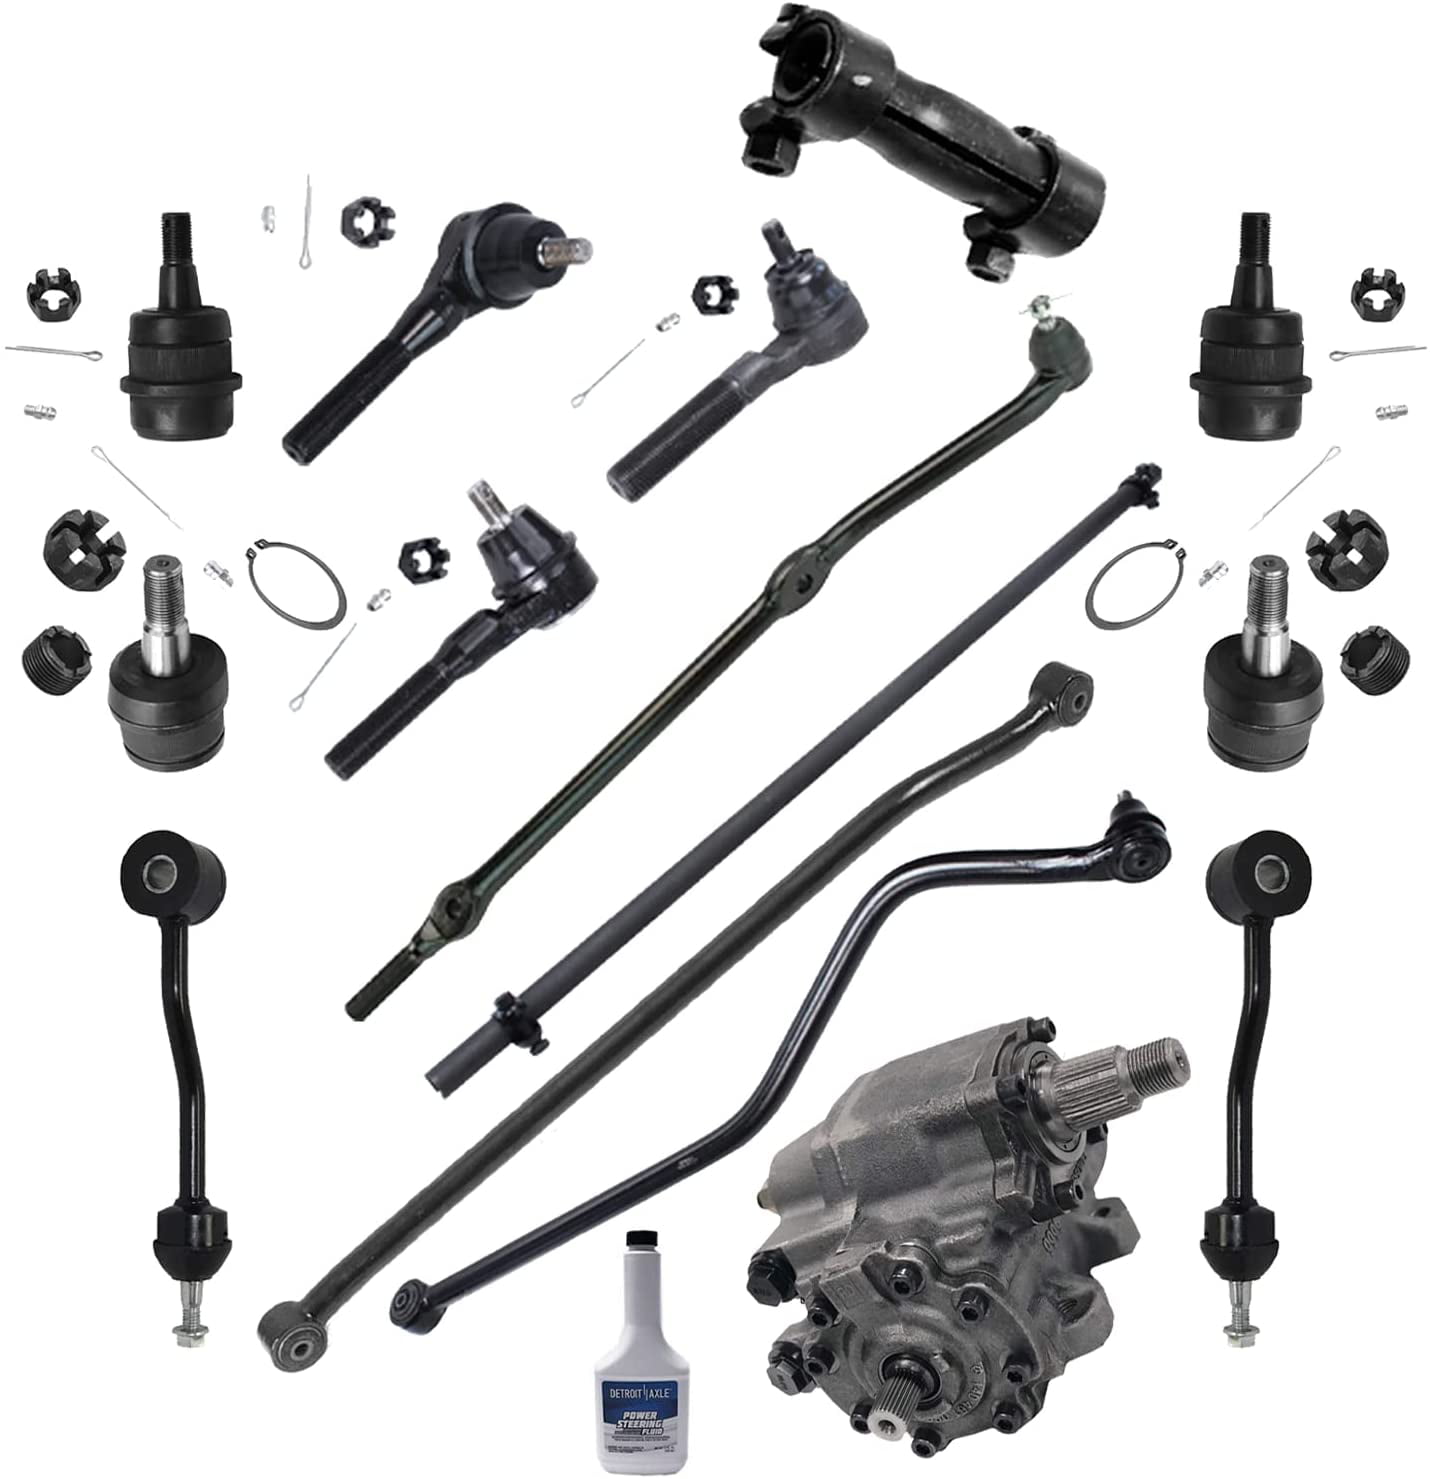 Detroit Axle - Complete Power Steering Gearbox Assembly with Inner Outer Tie  Rod, Drag Link, Track Bar, Sway Bar, Ball Joints Replacement for 2003-2006 Jeep  Wrangler - 15pc Set 